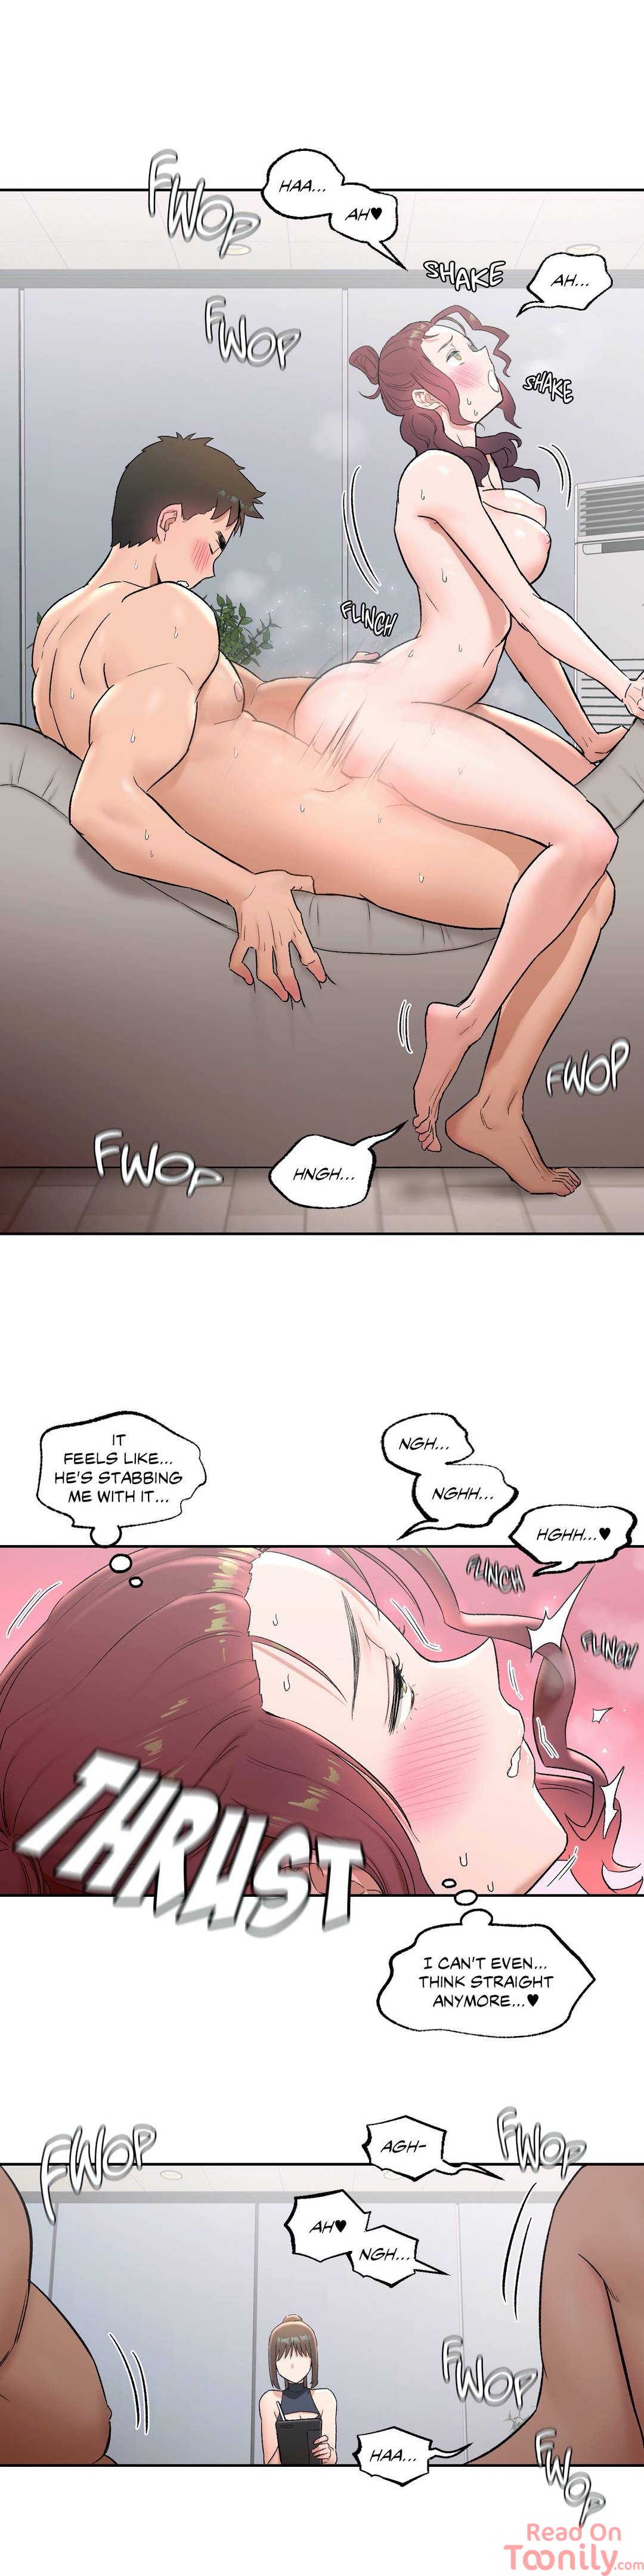 Sexercise - Chapter 44 Page 4